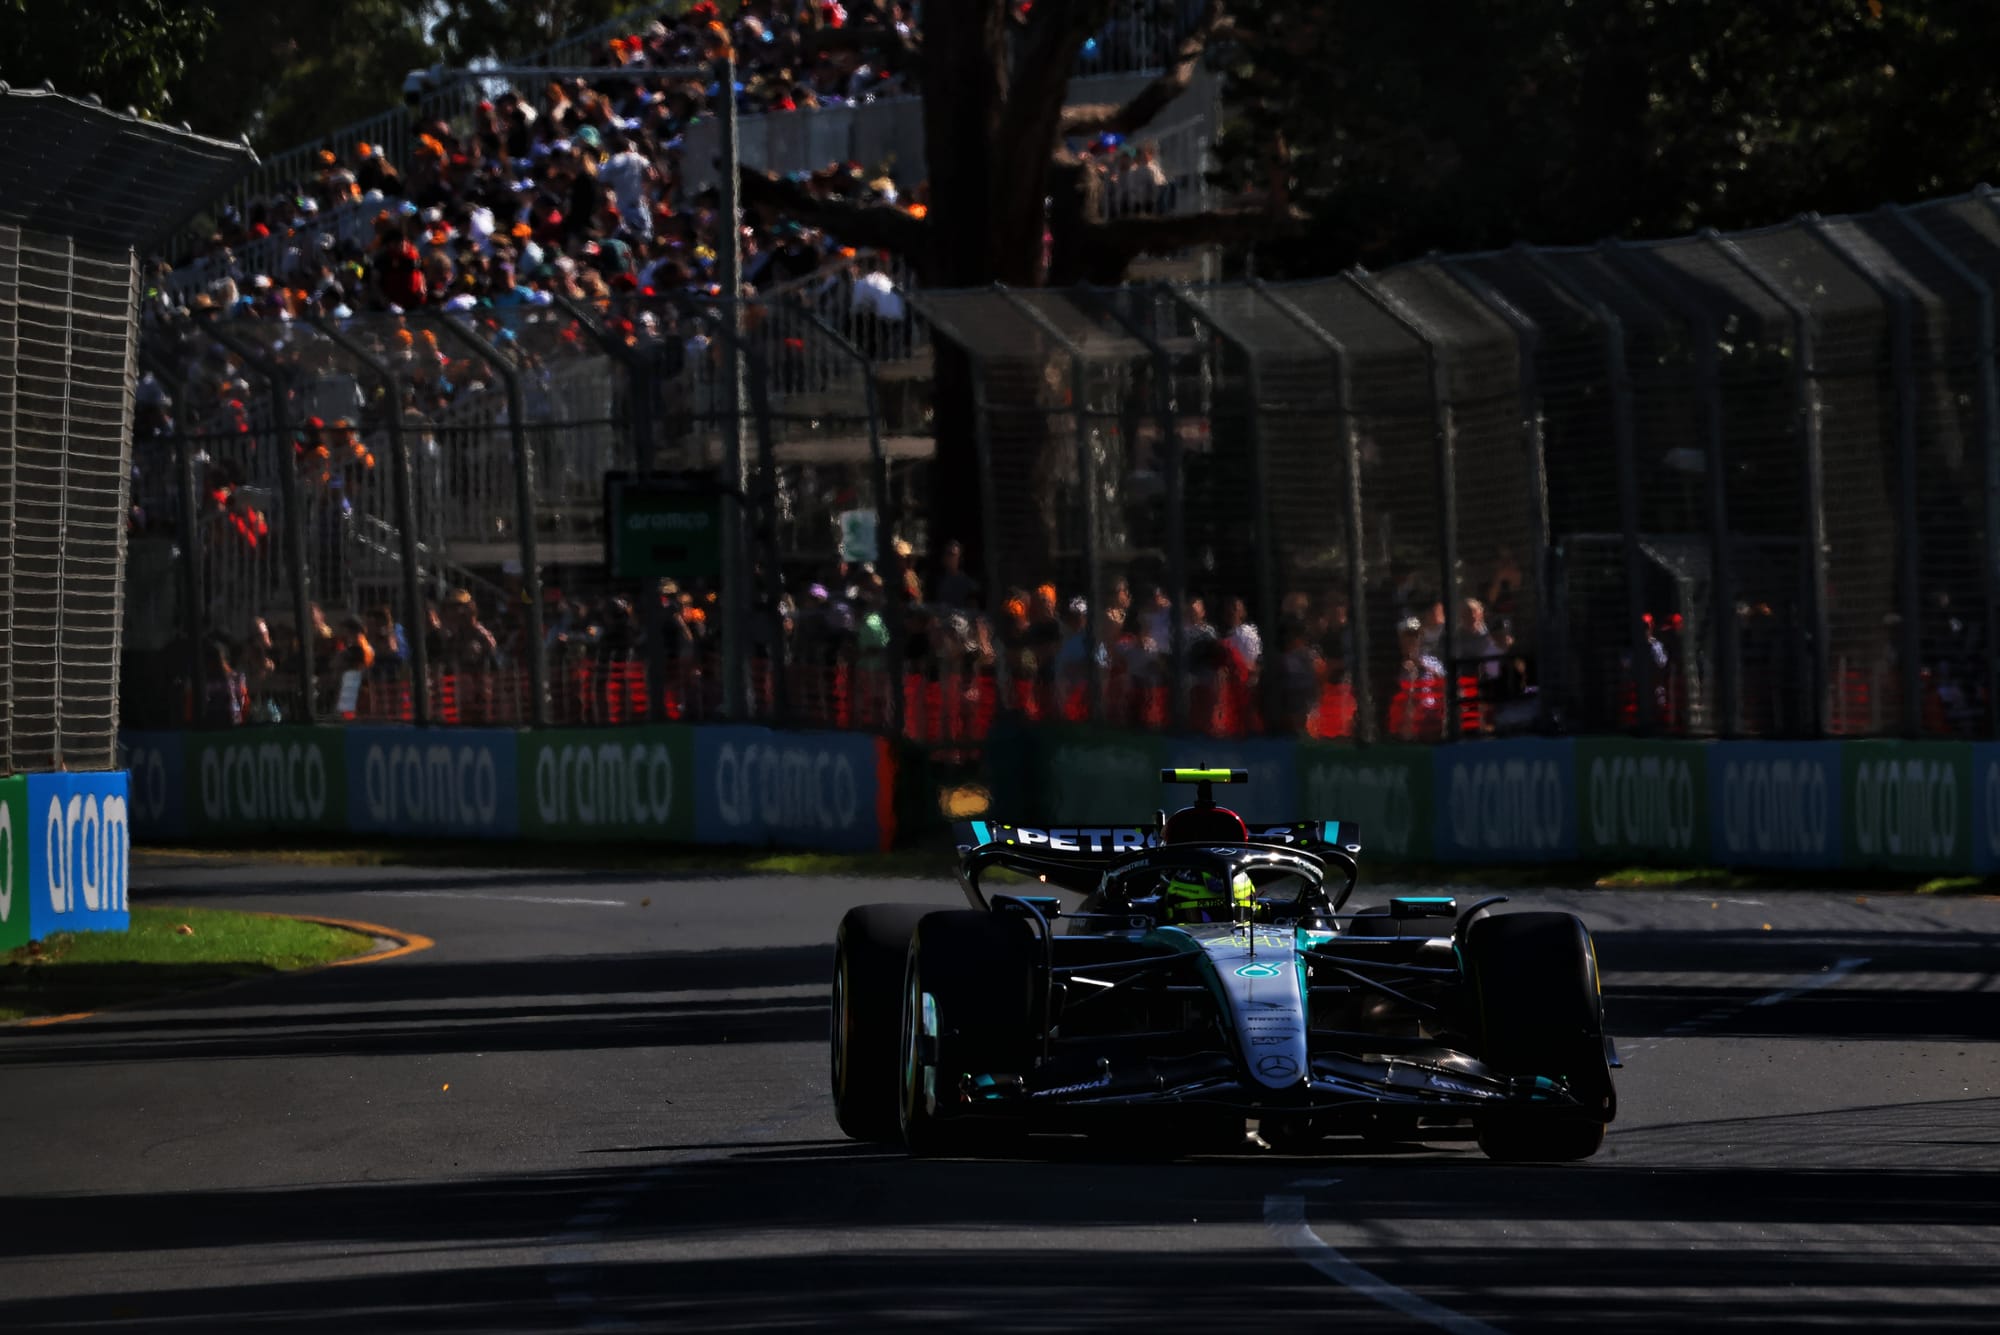 The fascinating qualifying fight Australian GP FP3 has teased - The Race